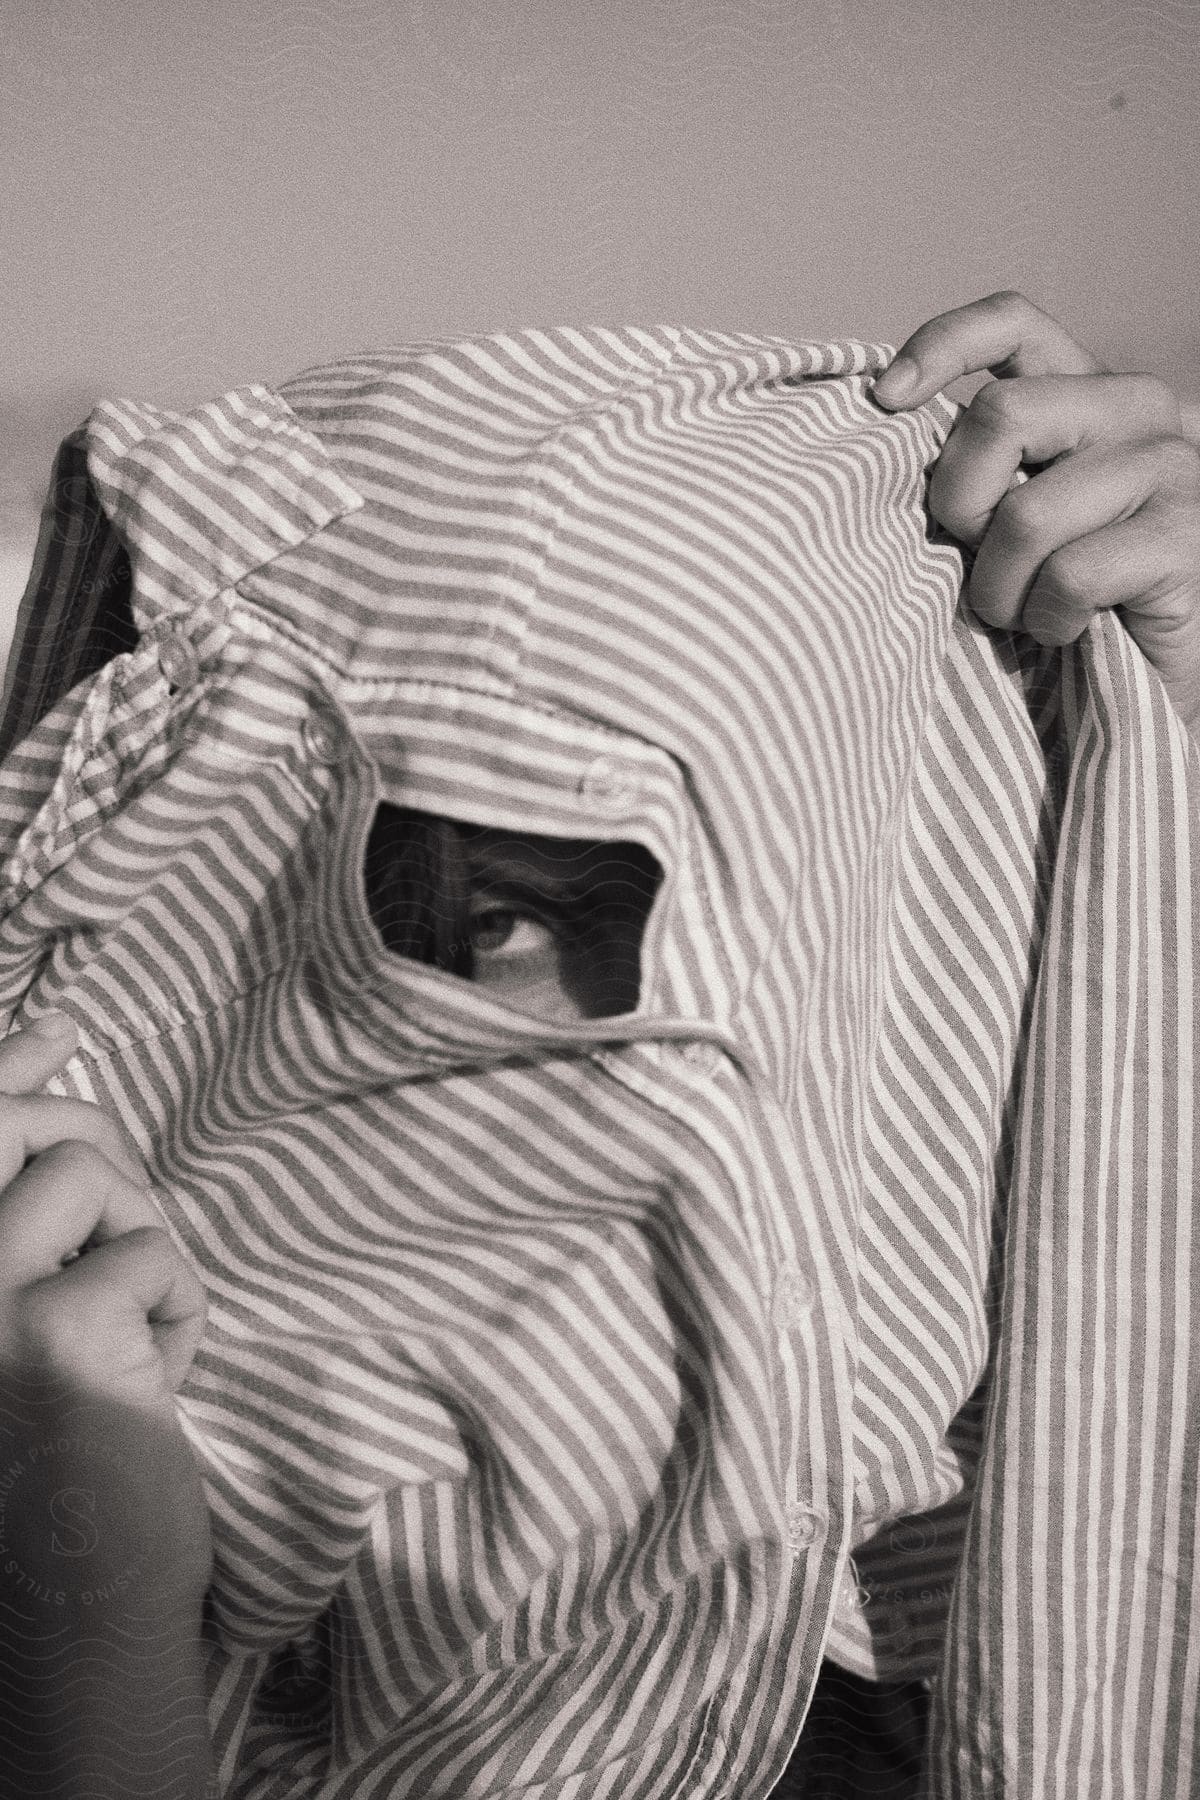 Person covering face with striped shirt showing only one eye